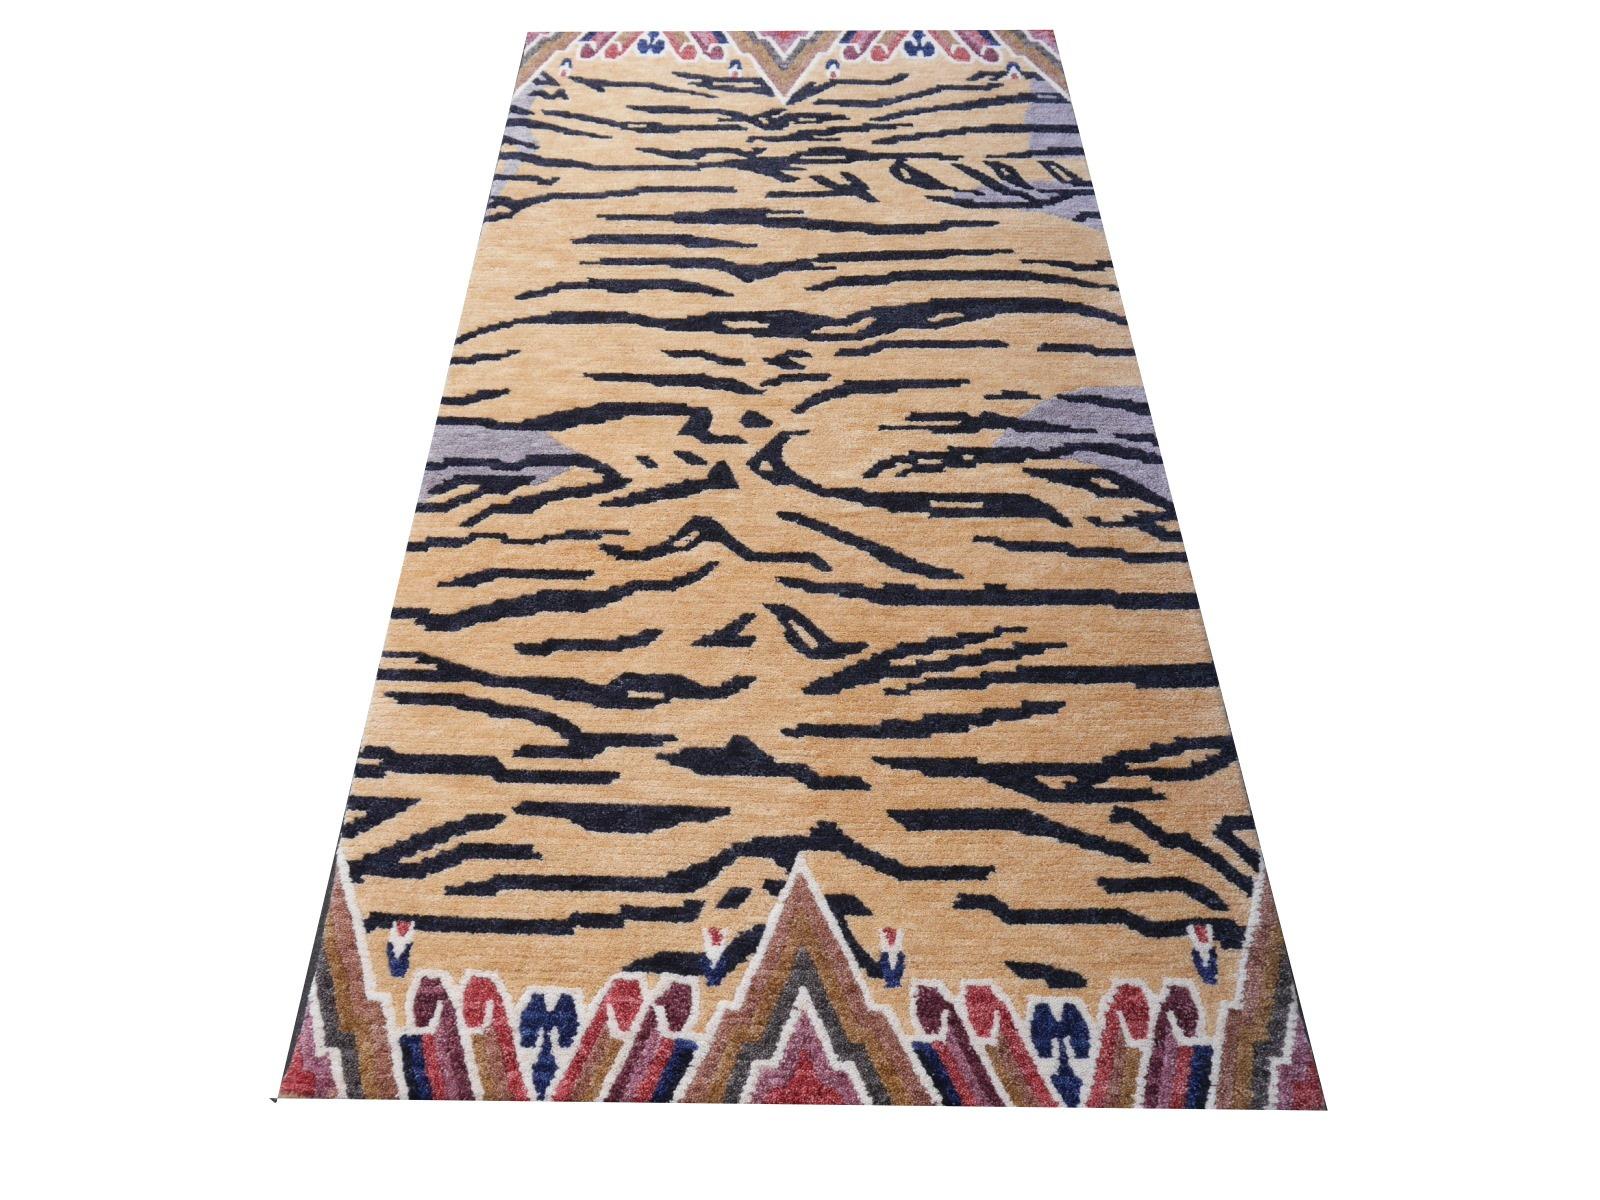 A Tibetan tiger rug, hand knotted in Nepal.

This traditional Tiger rug design is typically found on antique rugs called Khaden. It describes a small sized rug of about 3 x 6 ft that was used in Tibet to decorate columns or seat pad. Often these